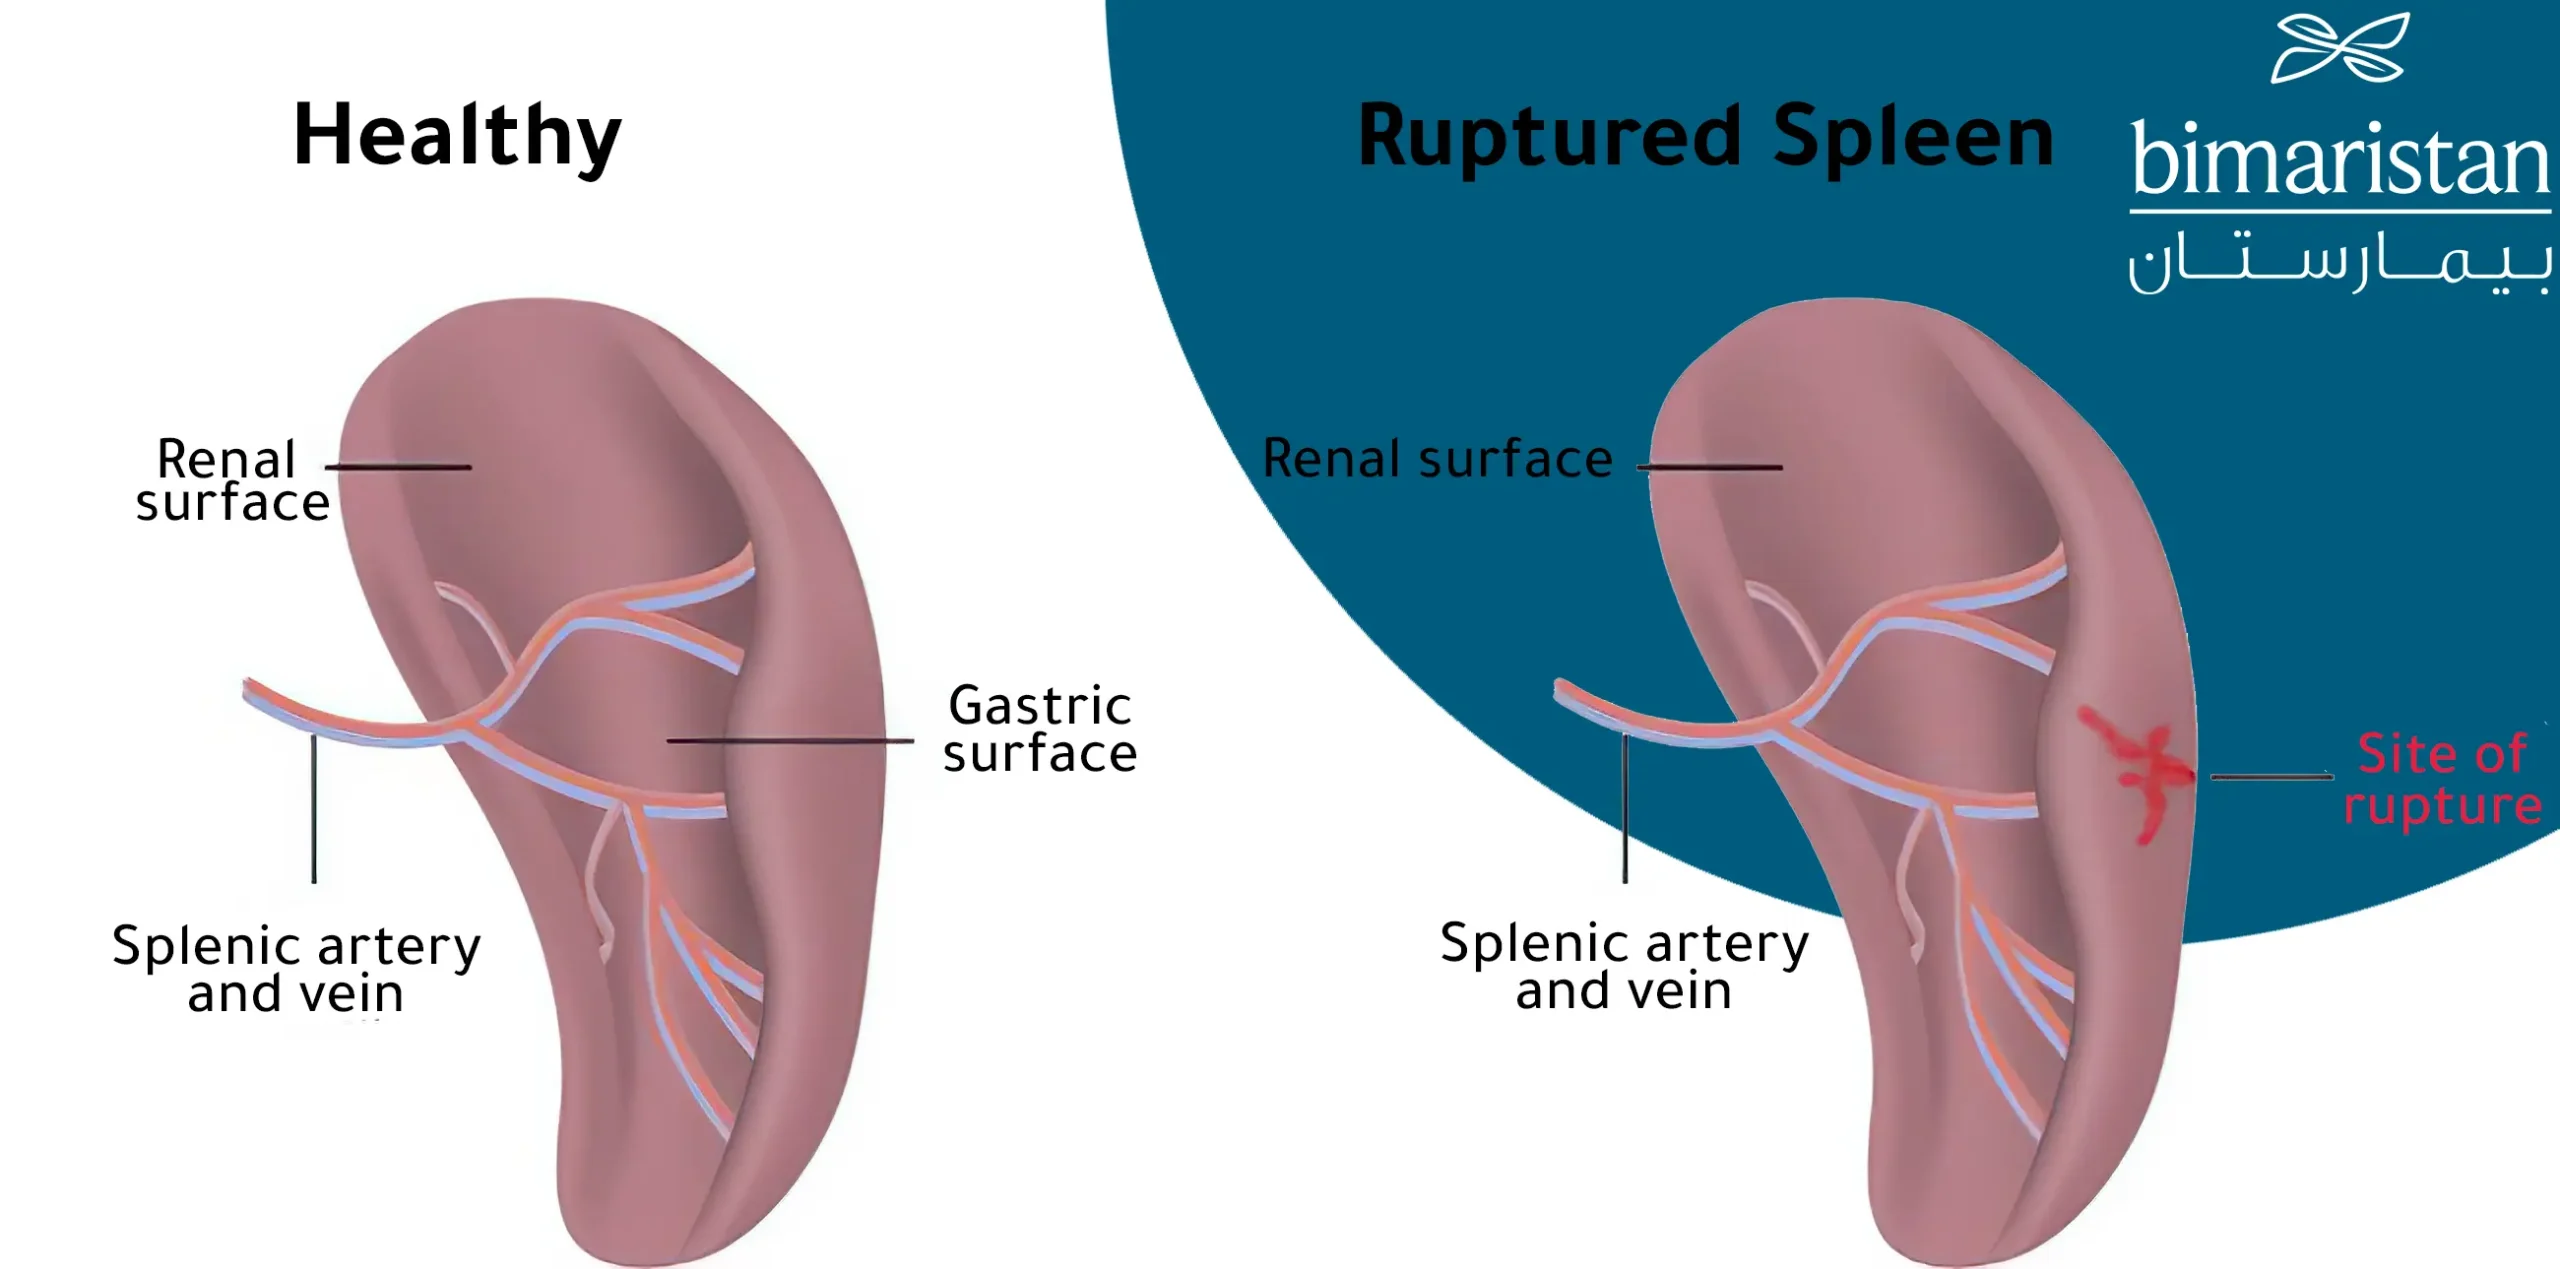 The difference between normal and ruptured spleen